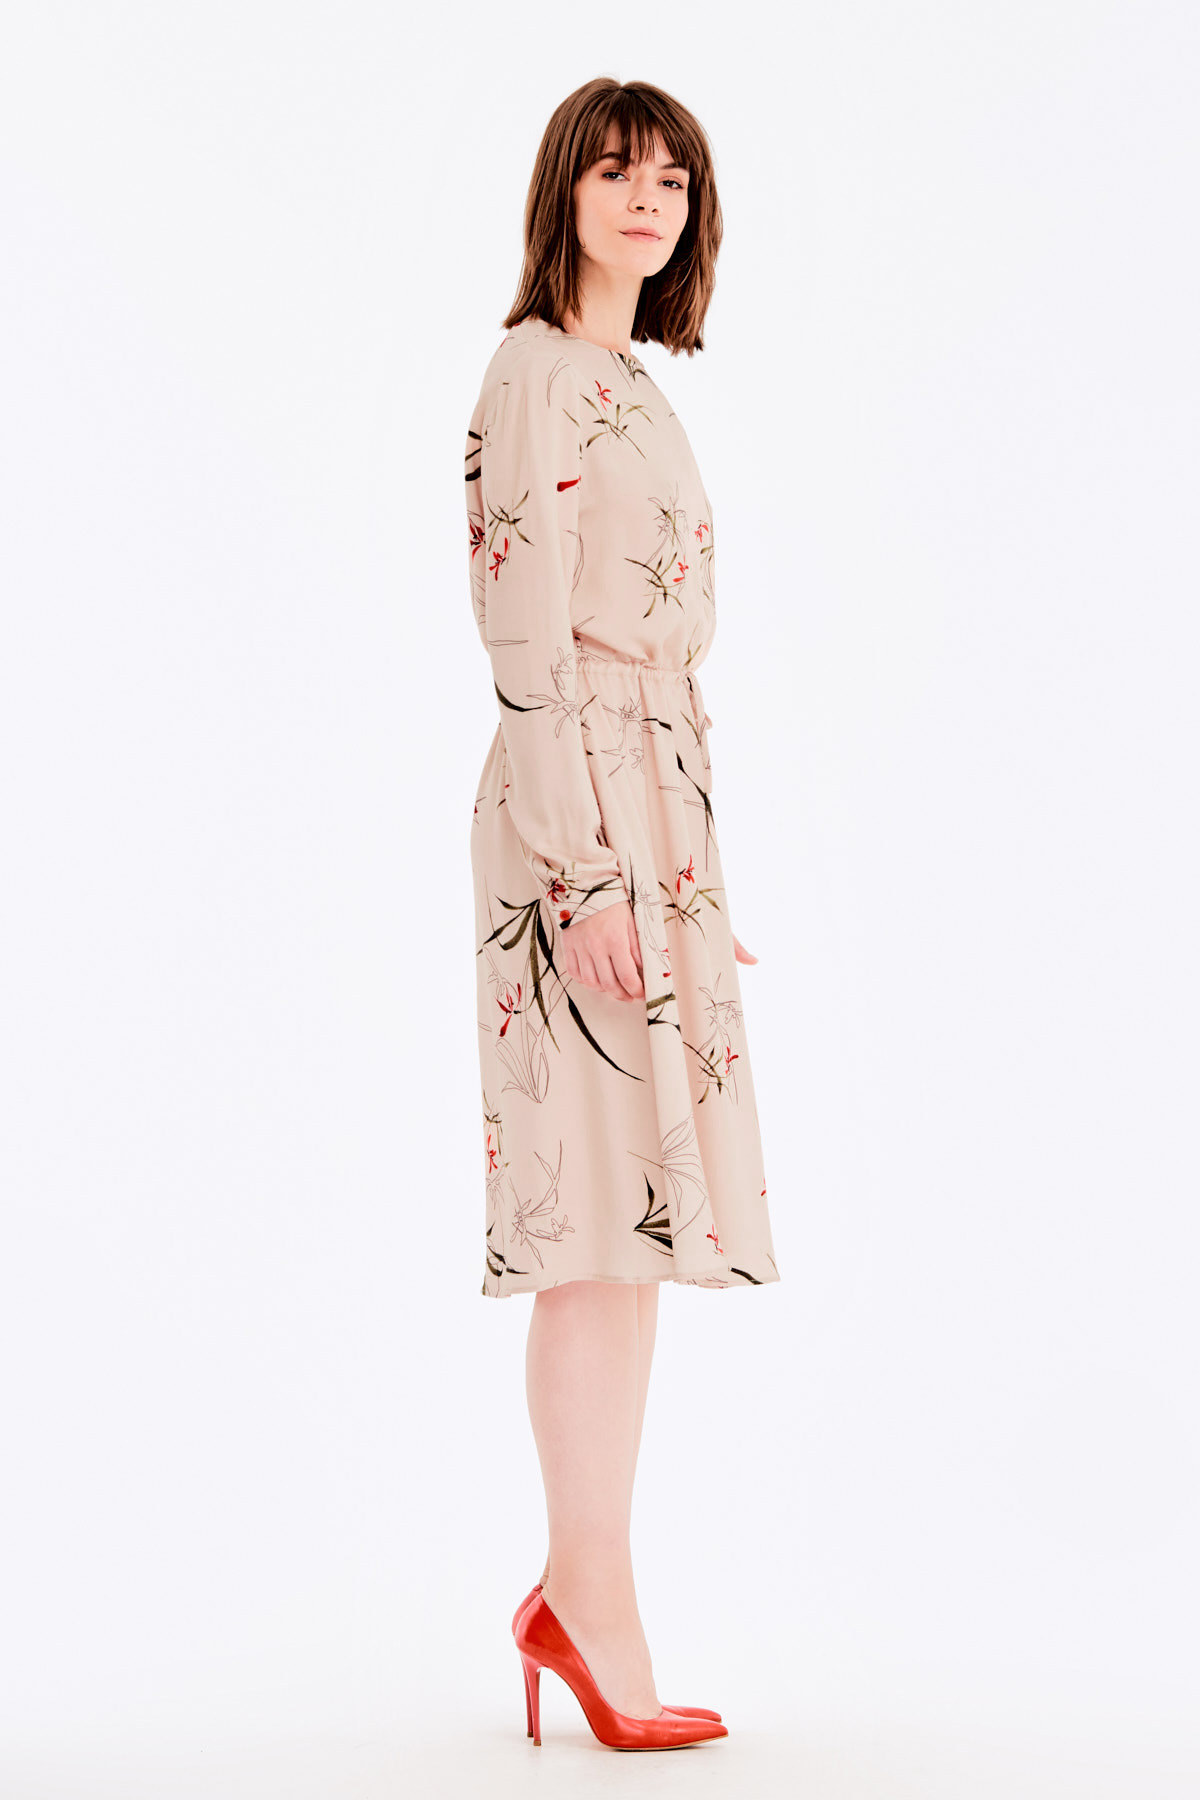 Beige dress with a floral print and ties, photo 7